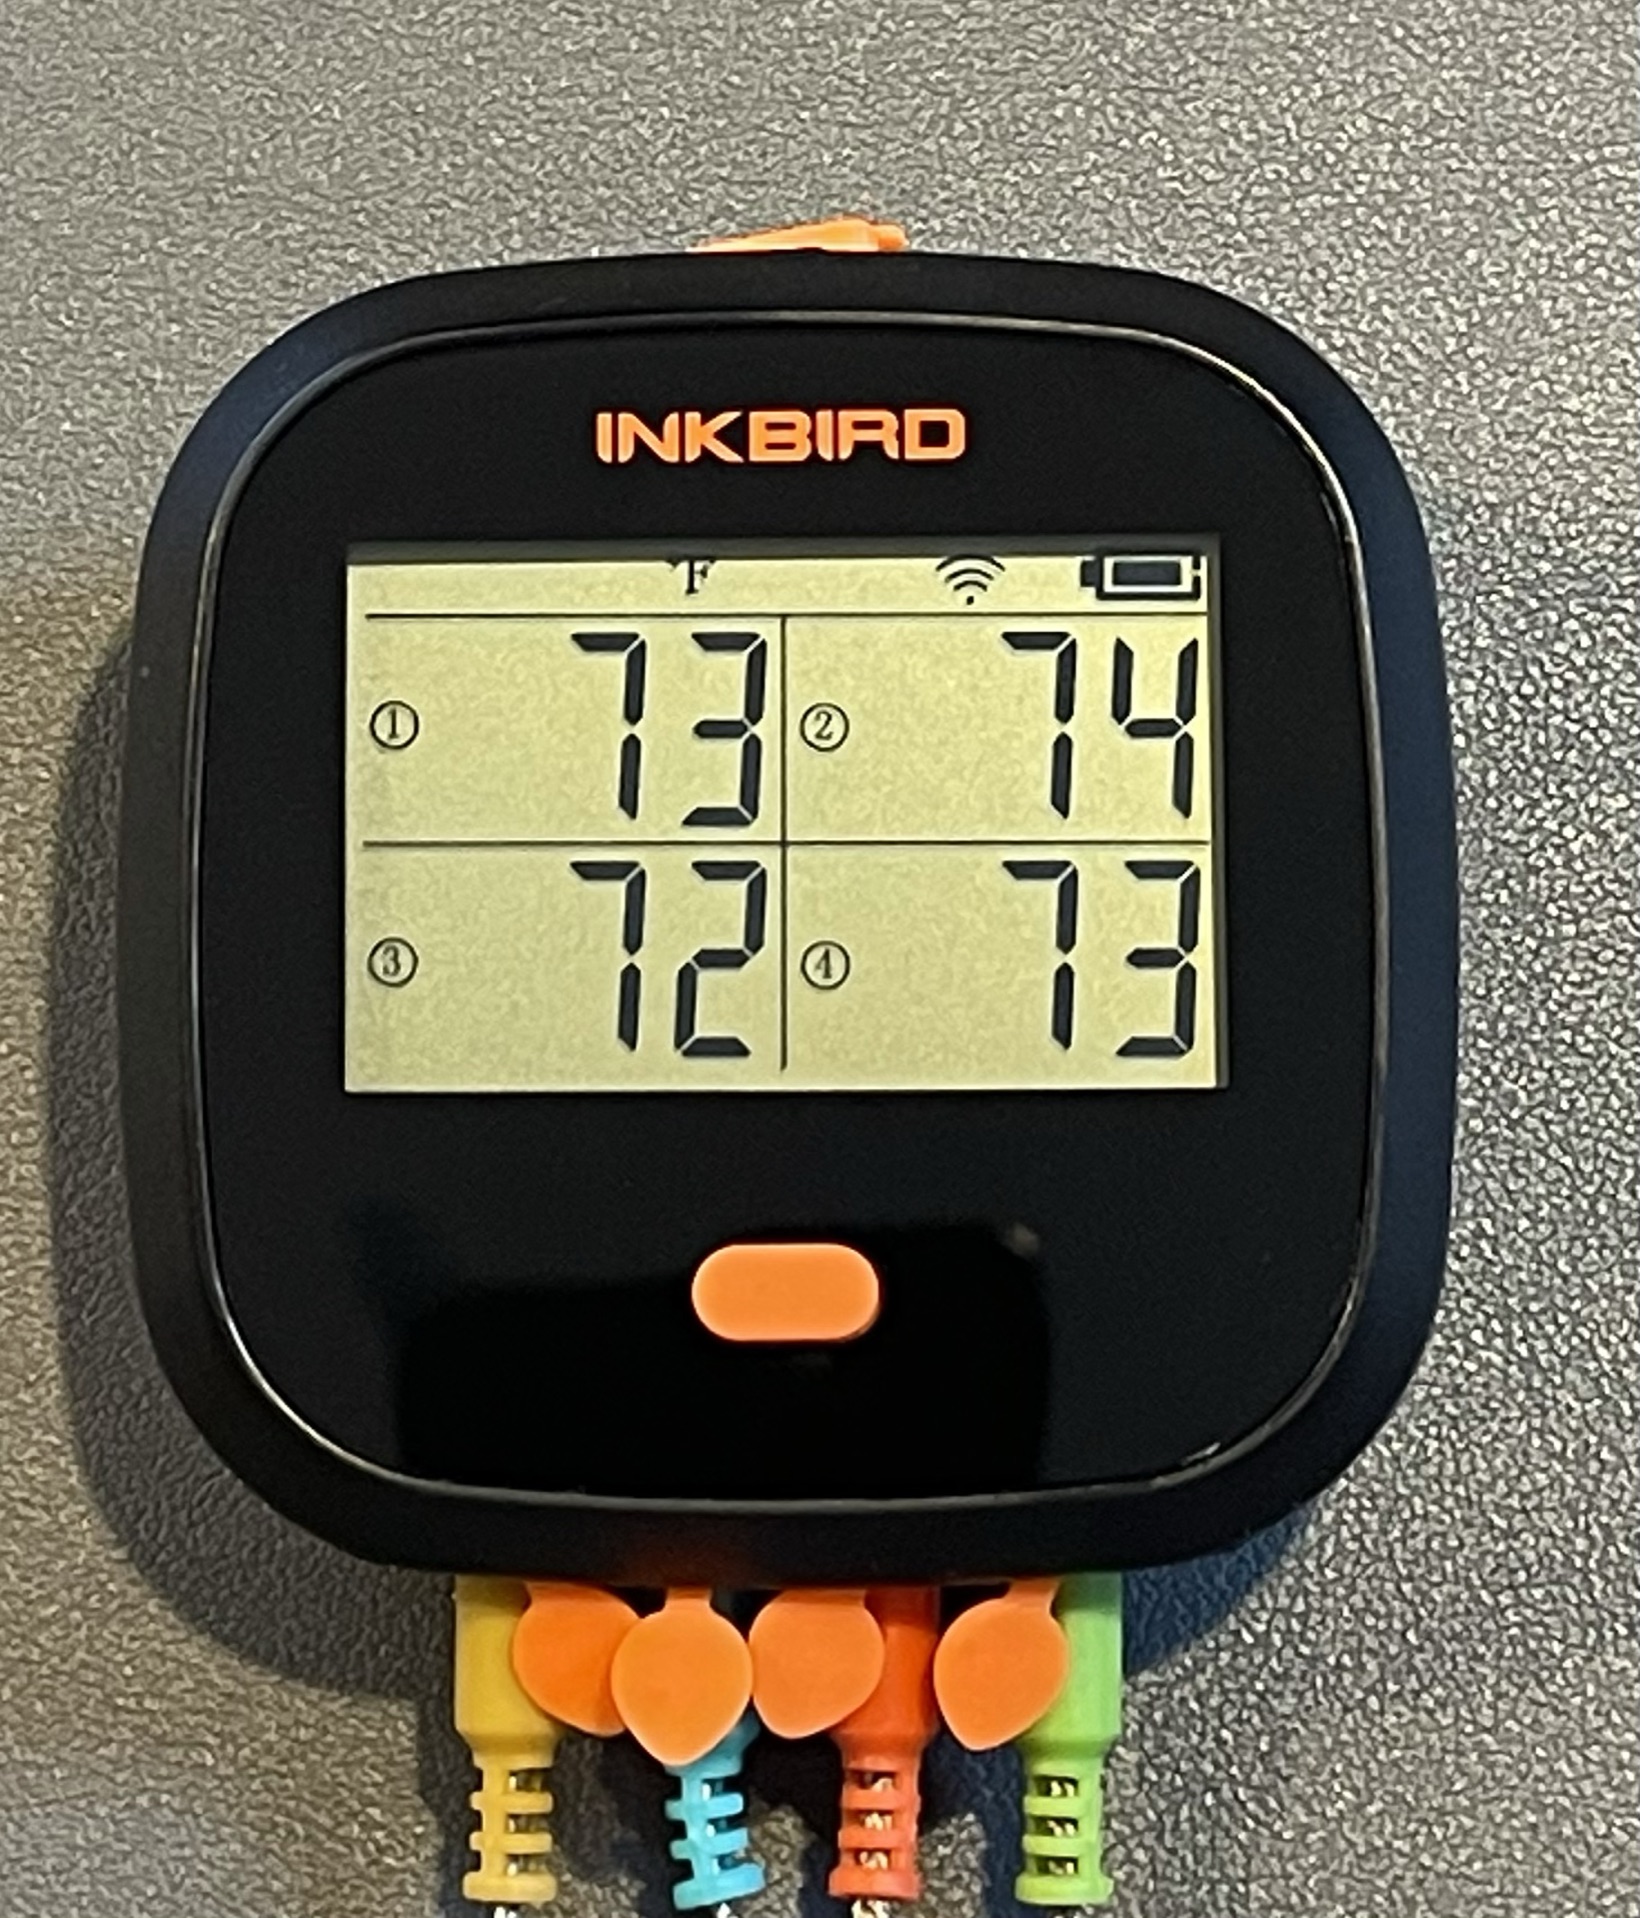 Inkbird IBBQ-4T WiFi Grill Thermometer Review - Thermo Meat